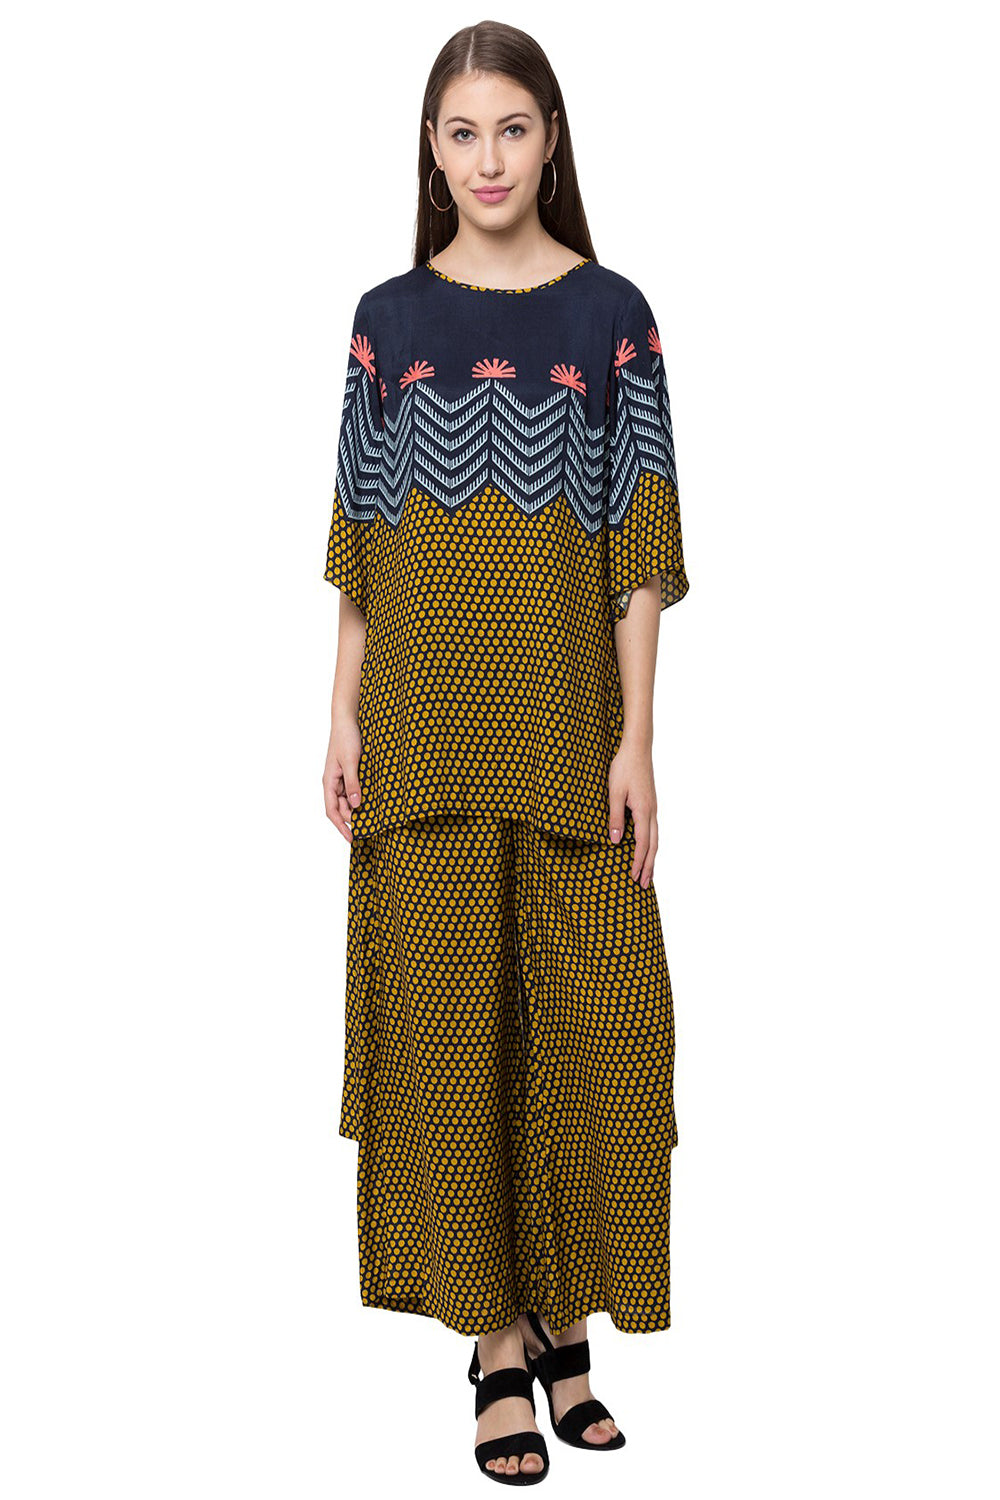 Tree Printed Top And Pants With Bell Sleeves